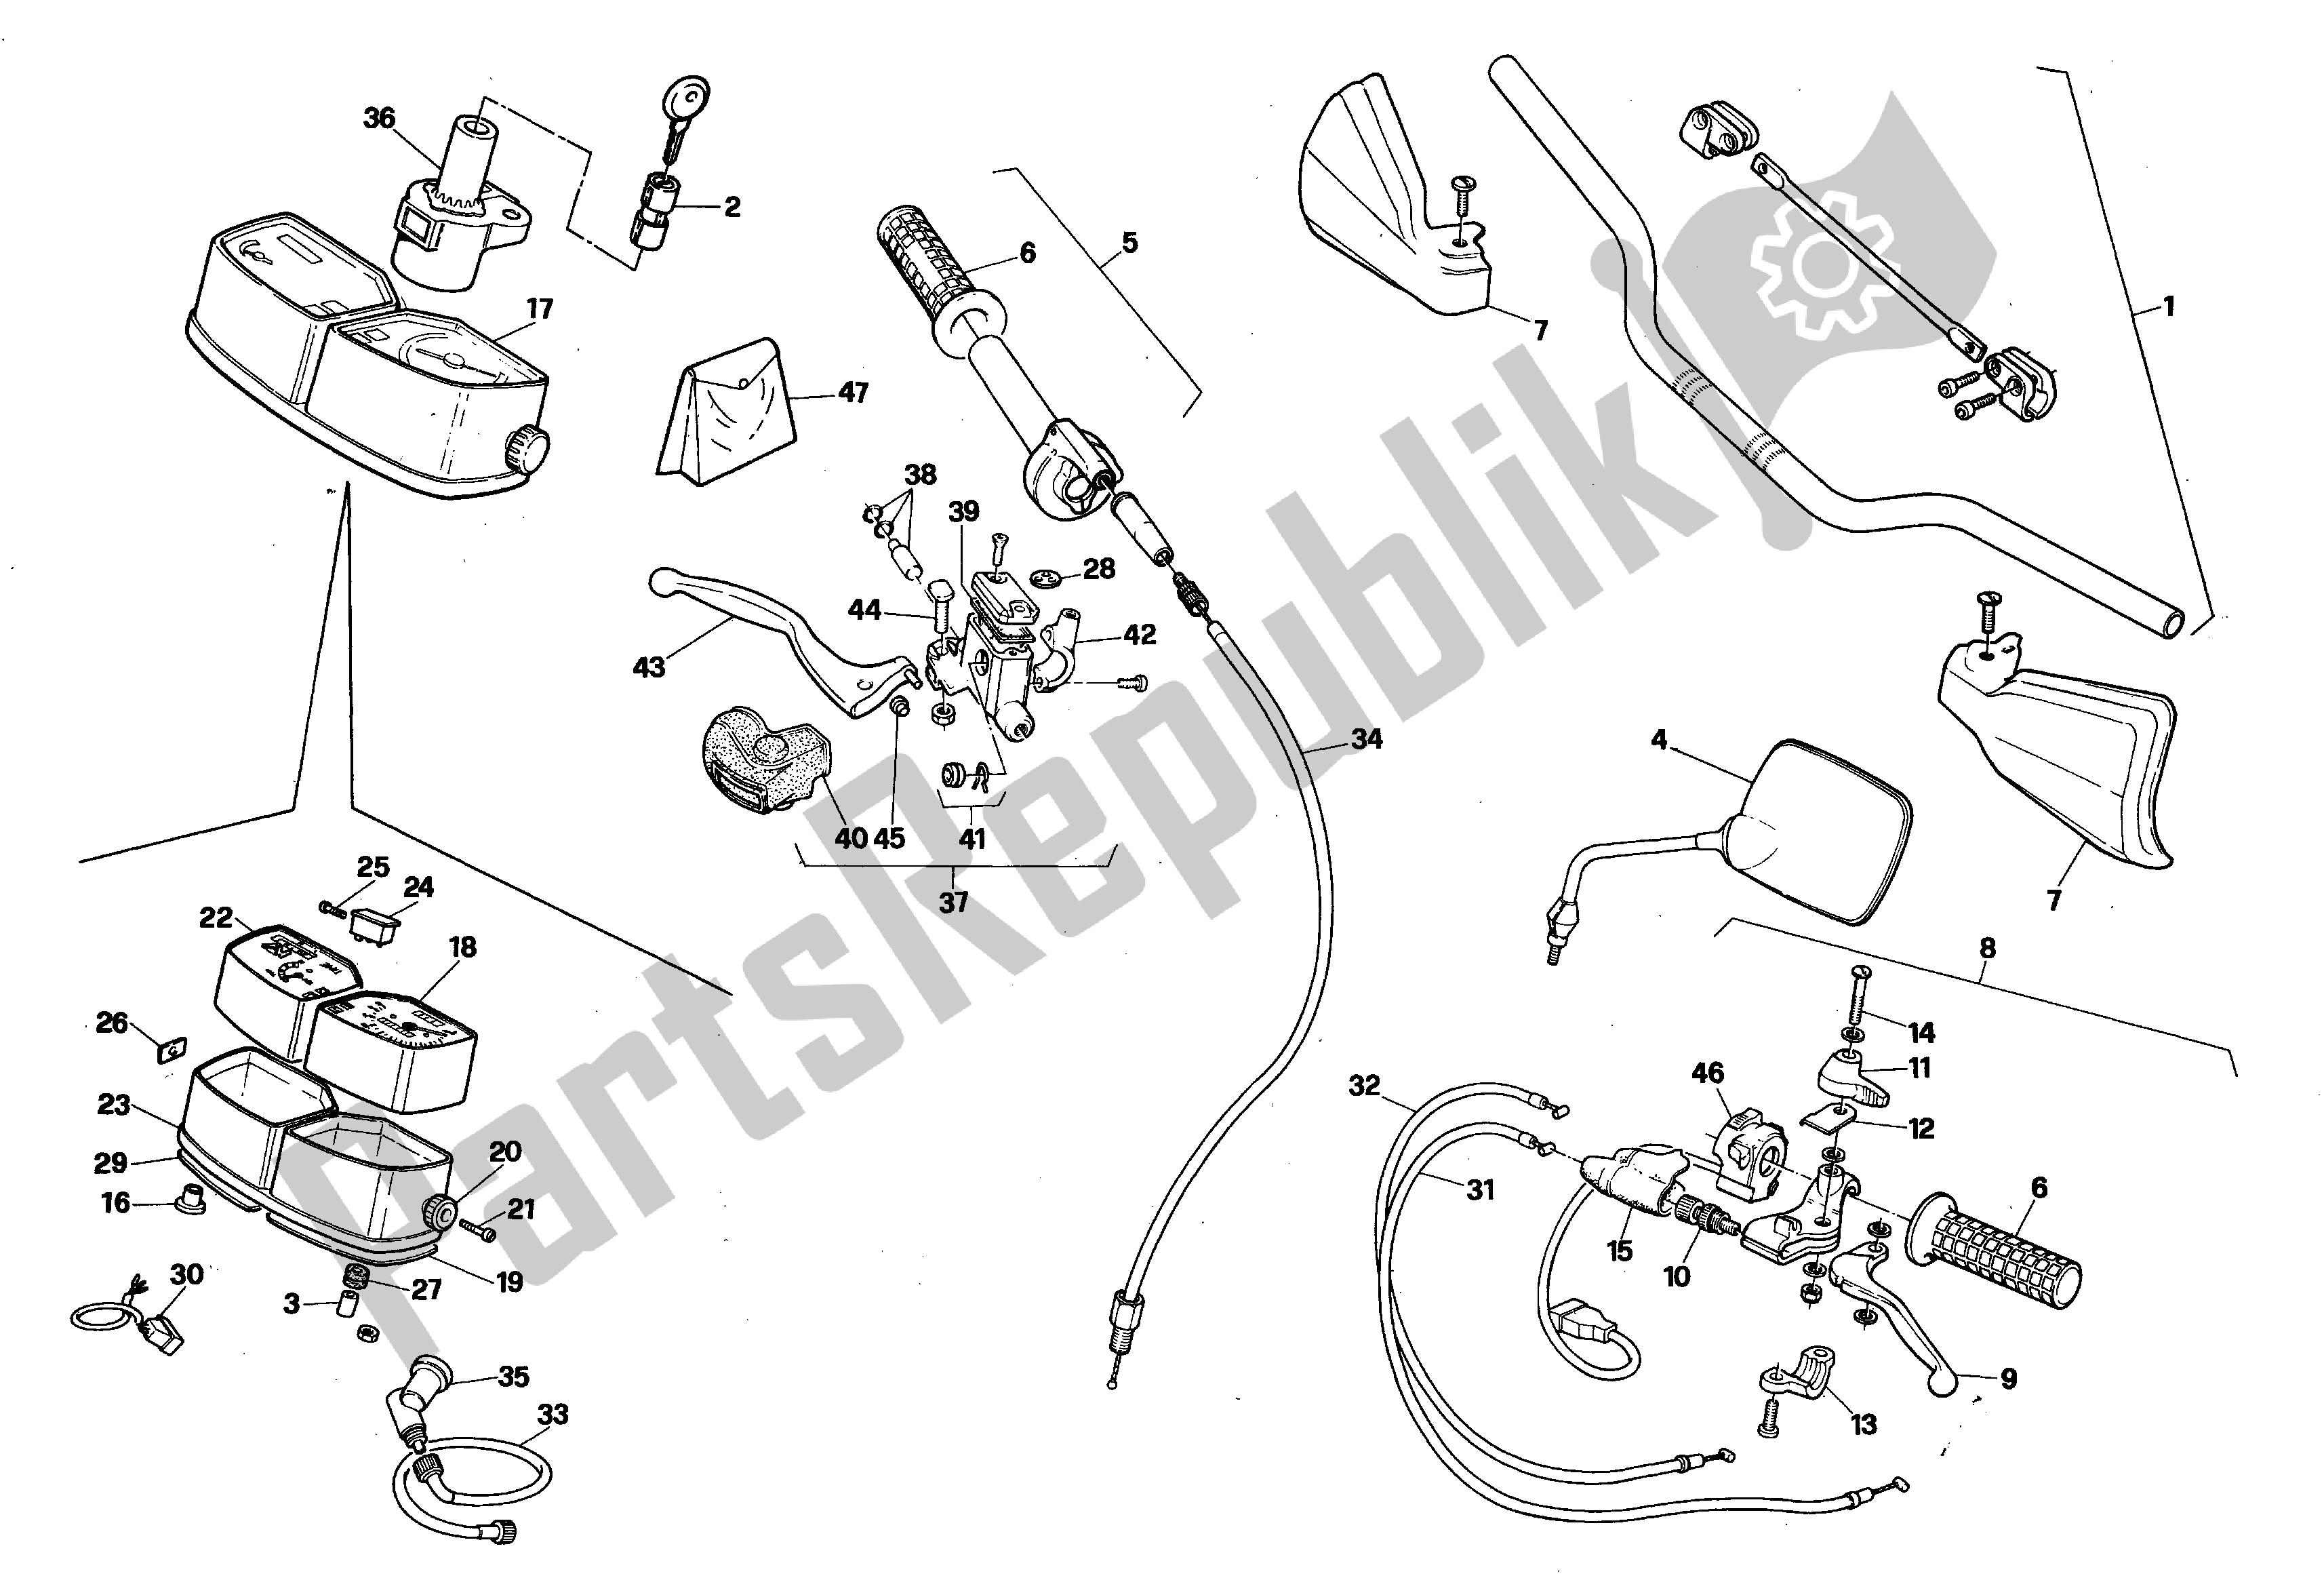 All parts for the Handle Bars And Commands of the Aprilia Tuareg 125 1990